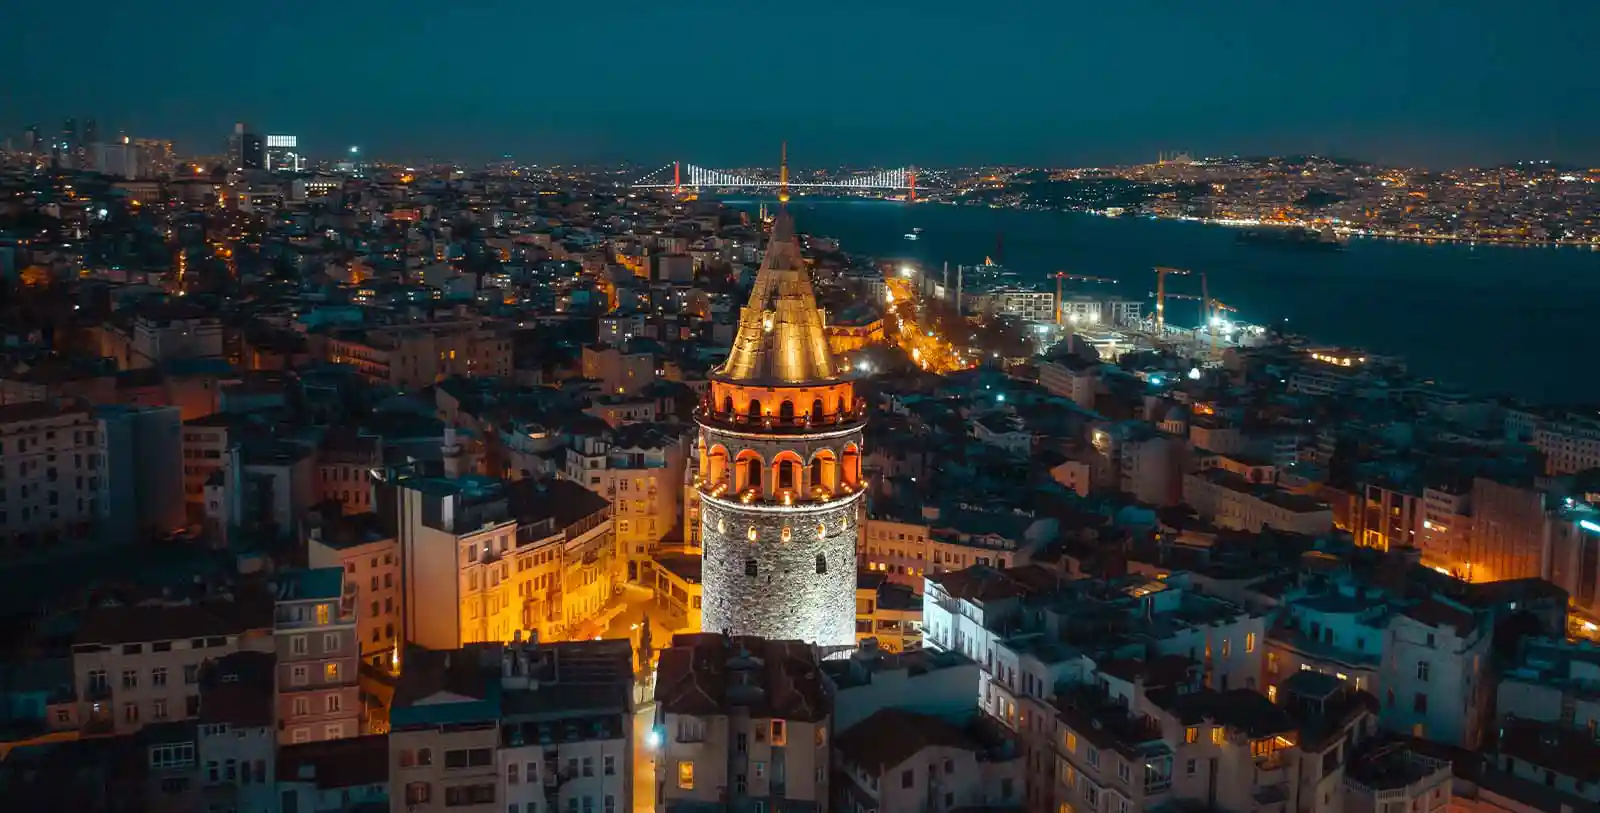 Beyoglu district is one of the most historical districts of Istanbul, full of places to see. An aerial view from the Galata tower and Istanbul at night.